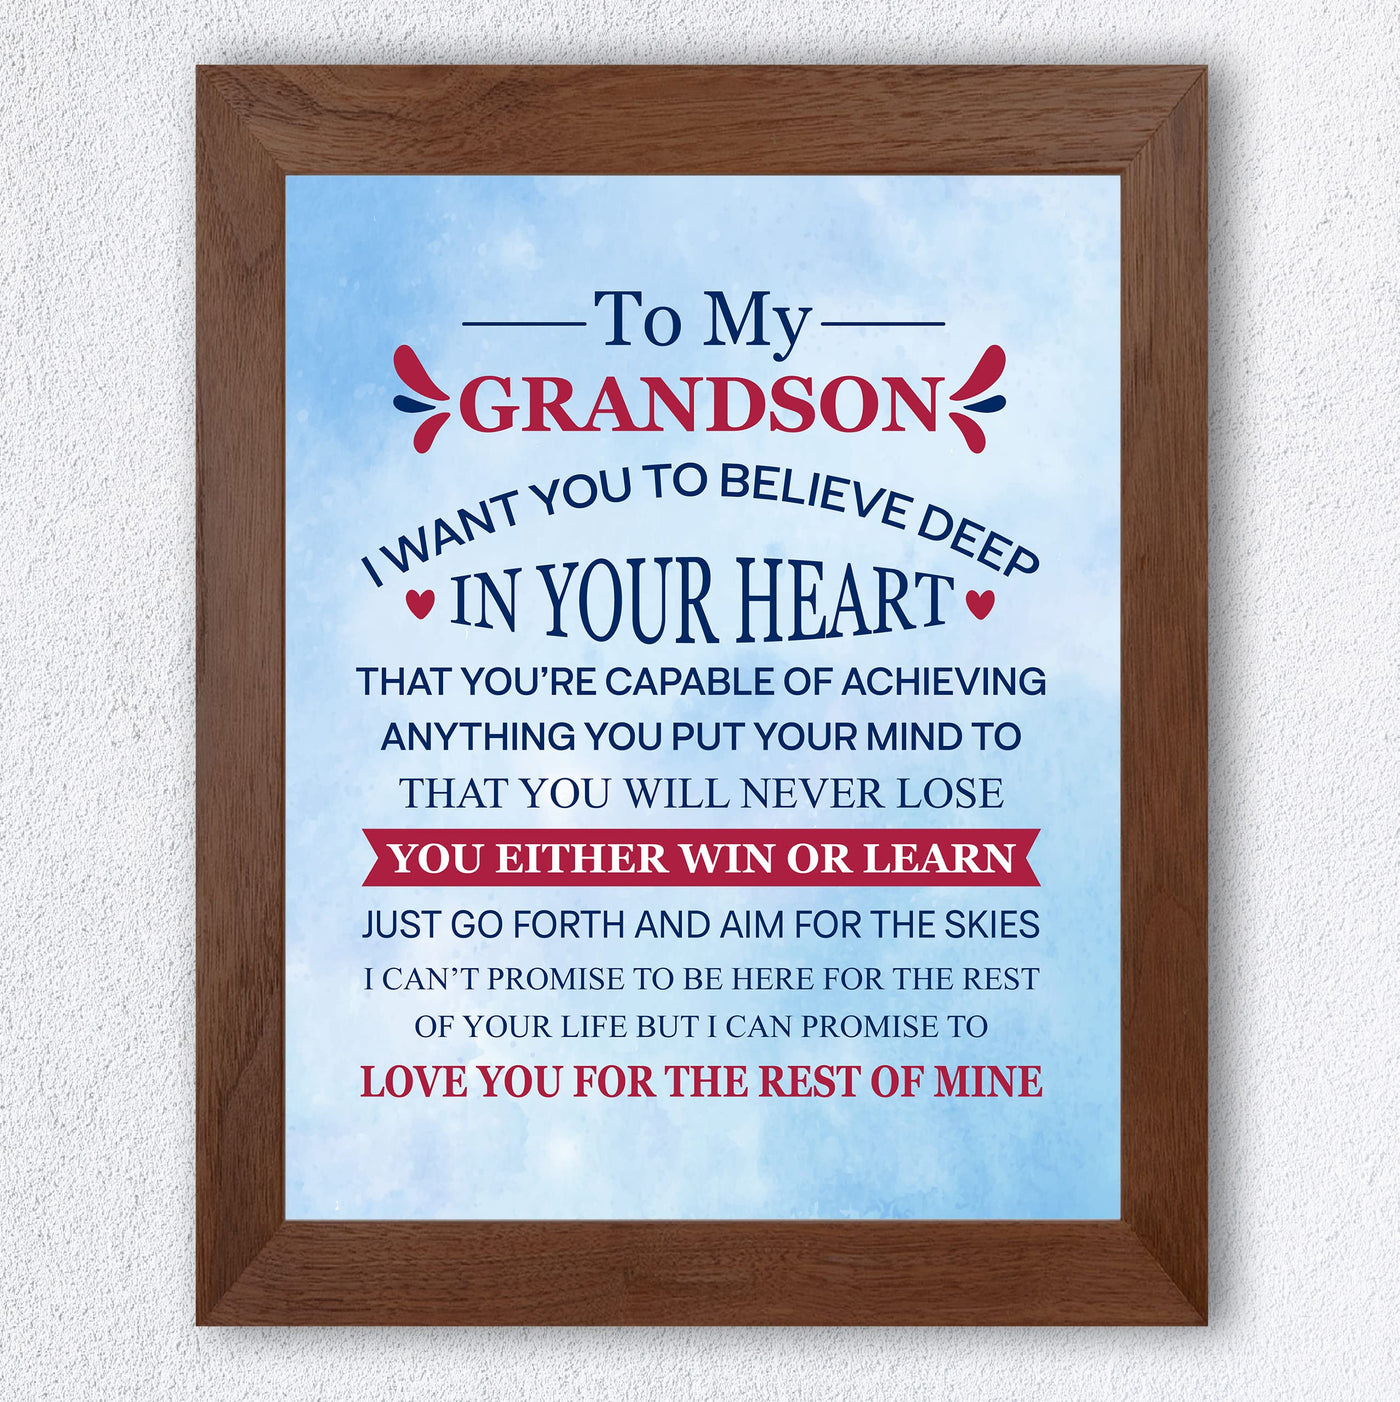 "To My Grandson - Win or Learn" Inspirational Love & Family Wall Decor -8 x 10" Rustic Typographic Art Print -Ready to Frame. Home-Living Room-Office Decoration. Perfect Gift for Grandsons!